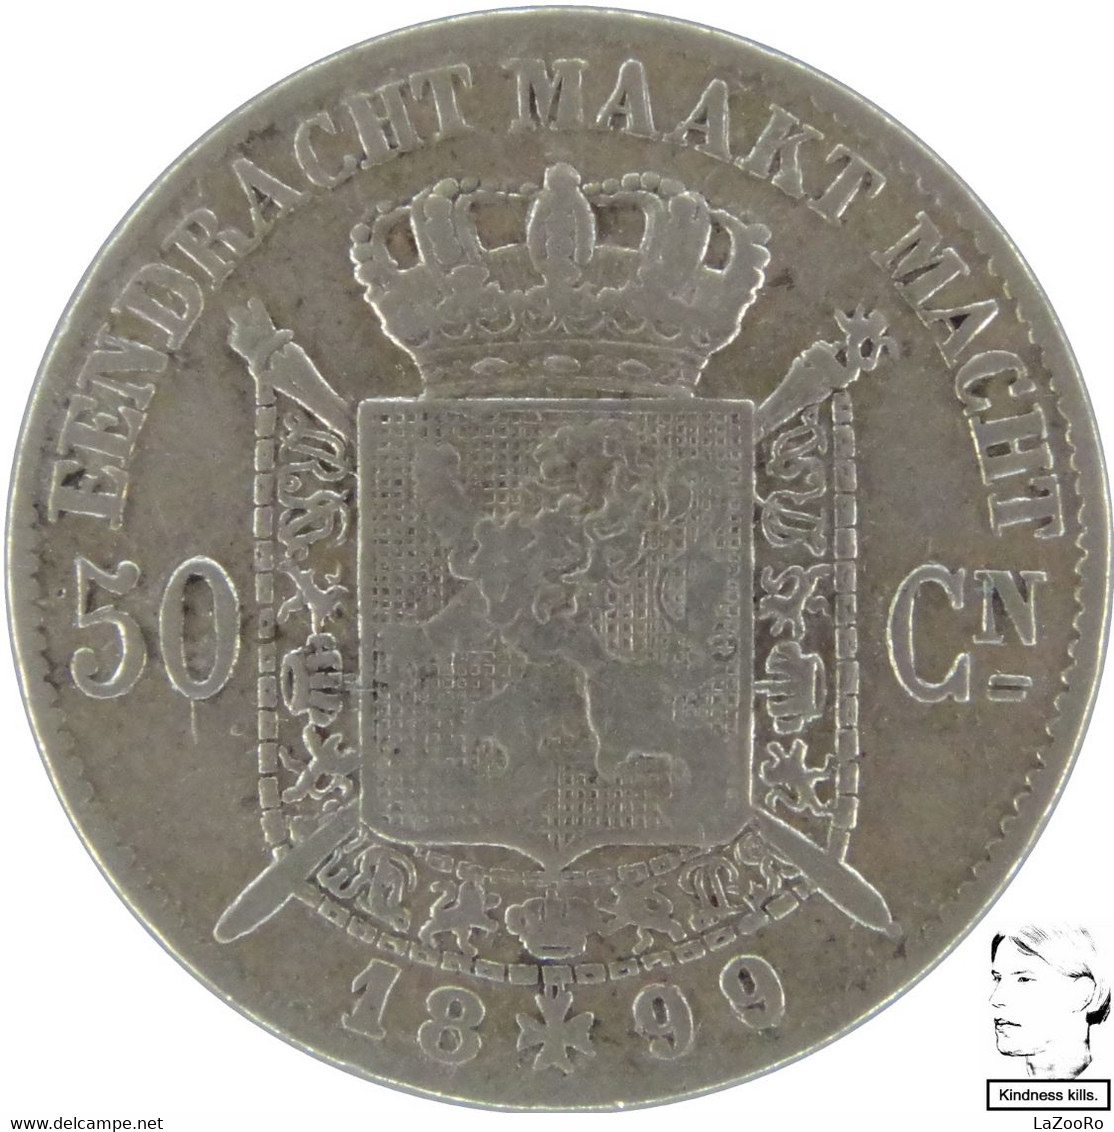 LaZooRo: Belgium 50 Centimes 1899/86 VF / XF Not In Krause - Silver - 50 Cent